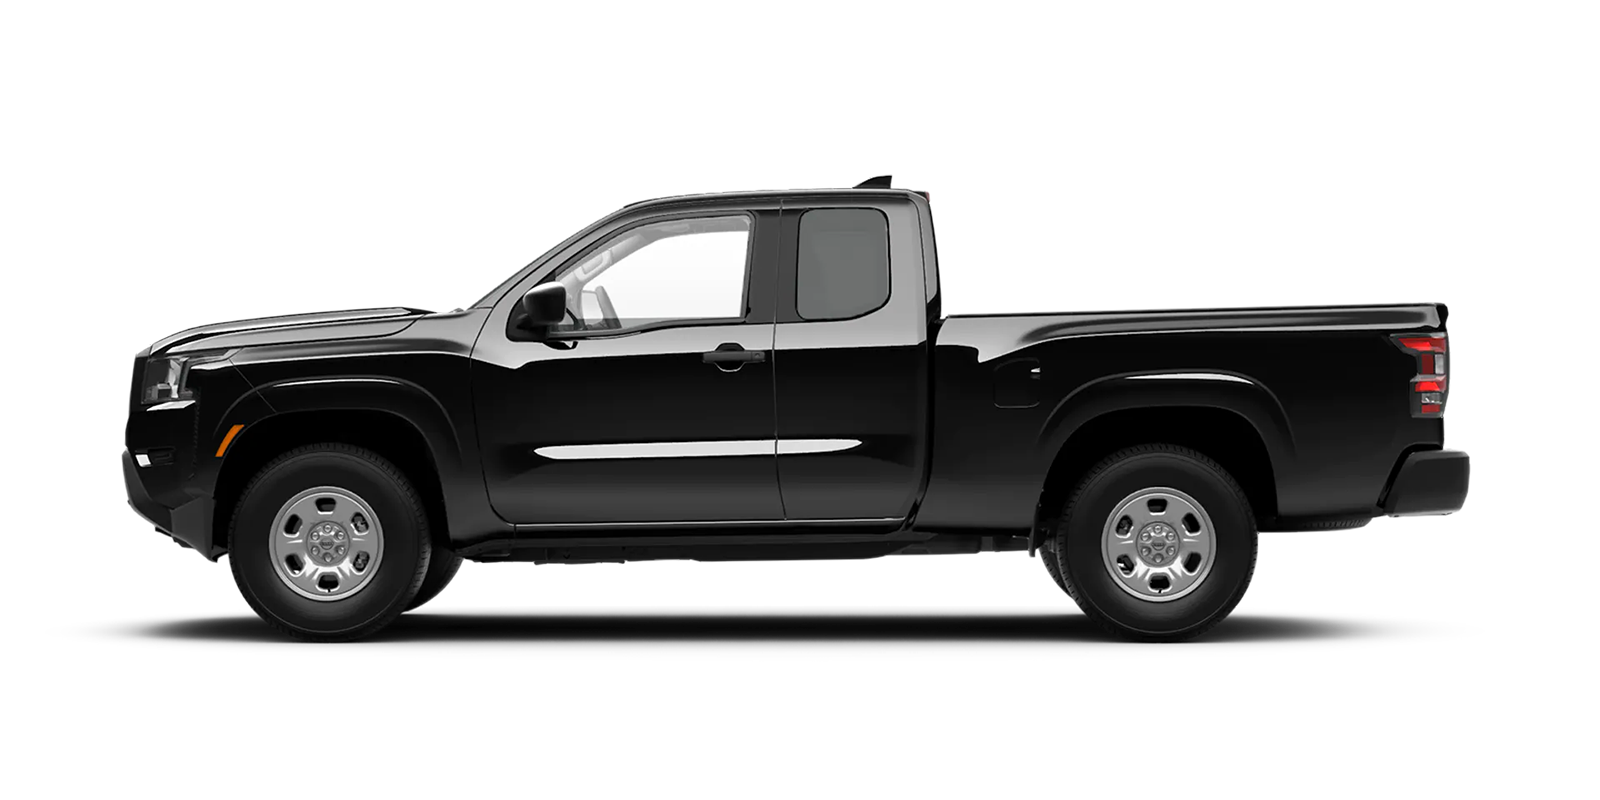 2022 Frontier King Cab S 4x4 in Super Black | Rusty Wallace Nissan in Knoxville TN